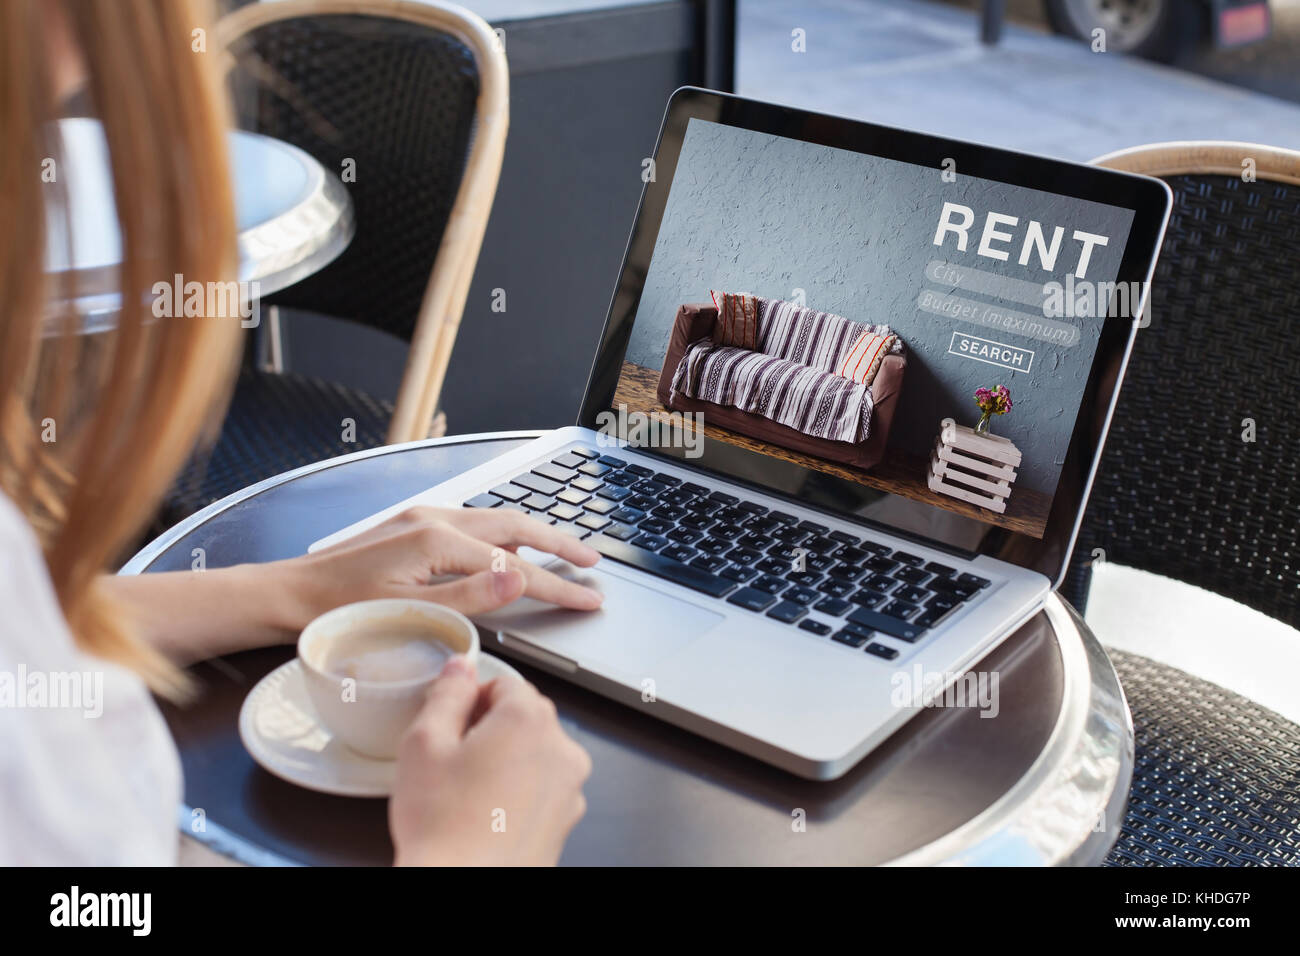 rent online concept, woman using internet website for rental apartments, houses and flats Stock Photo